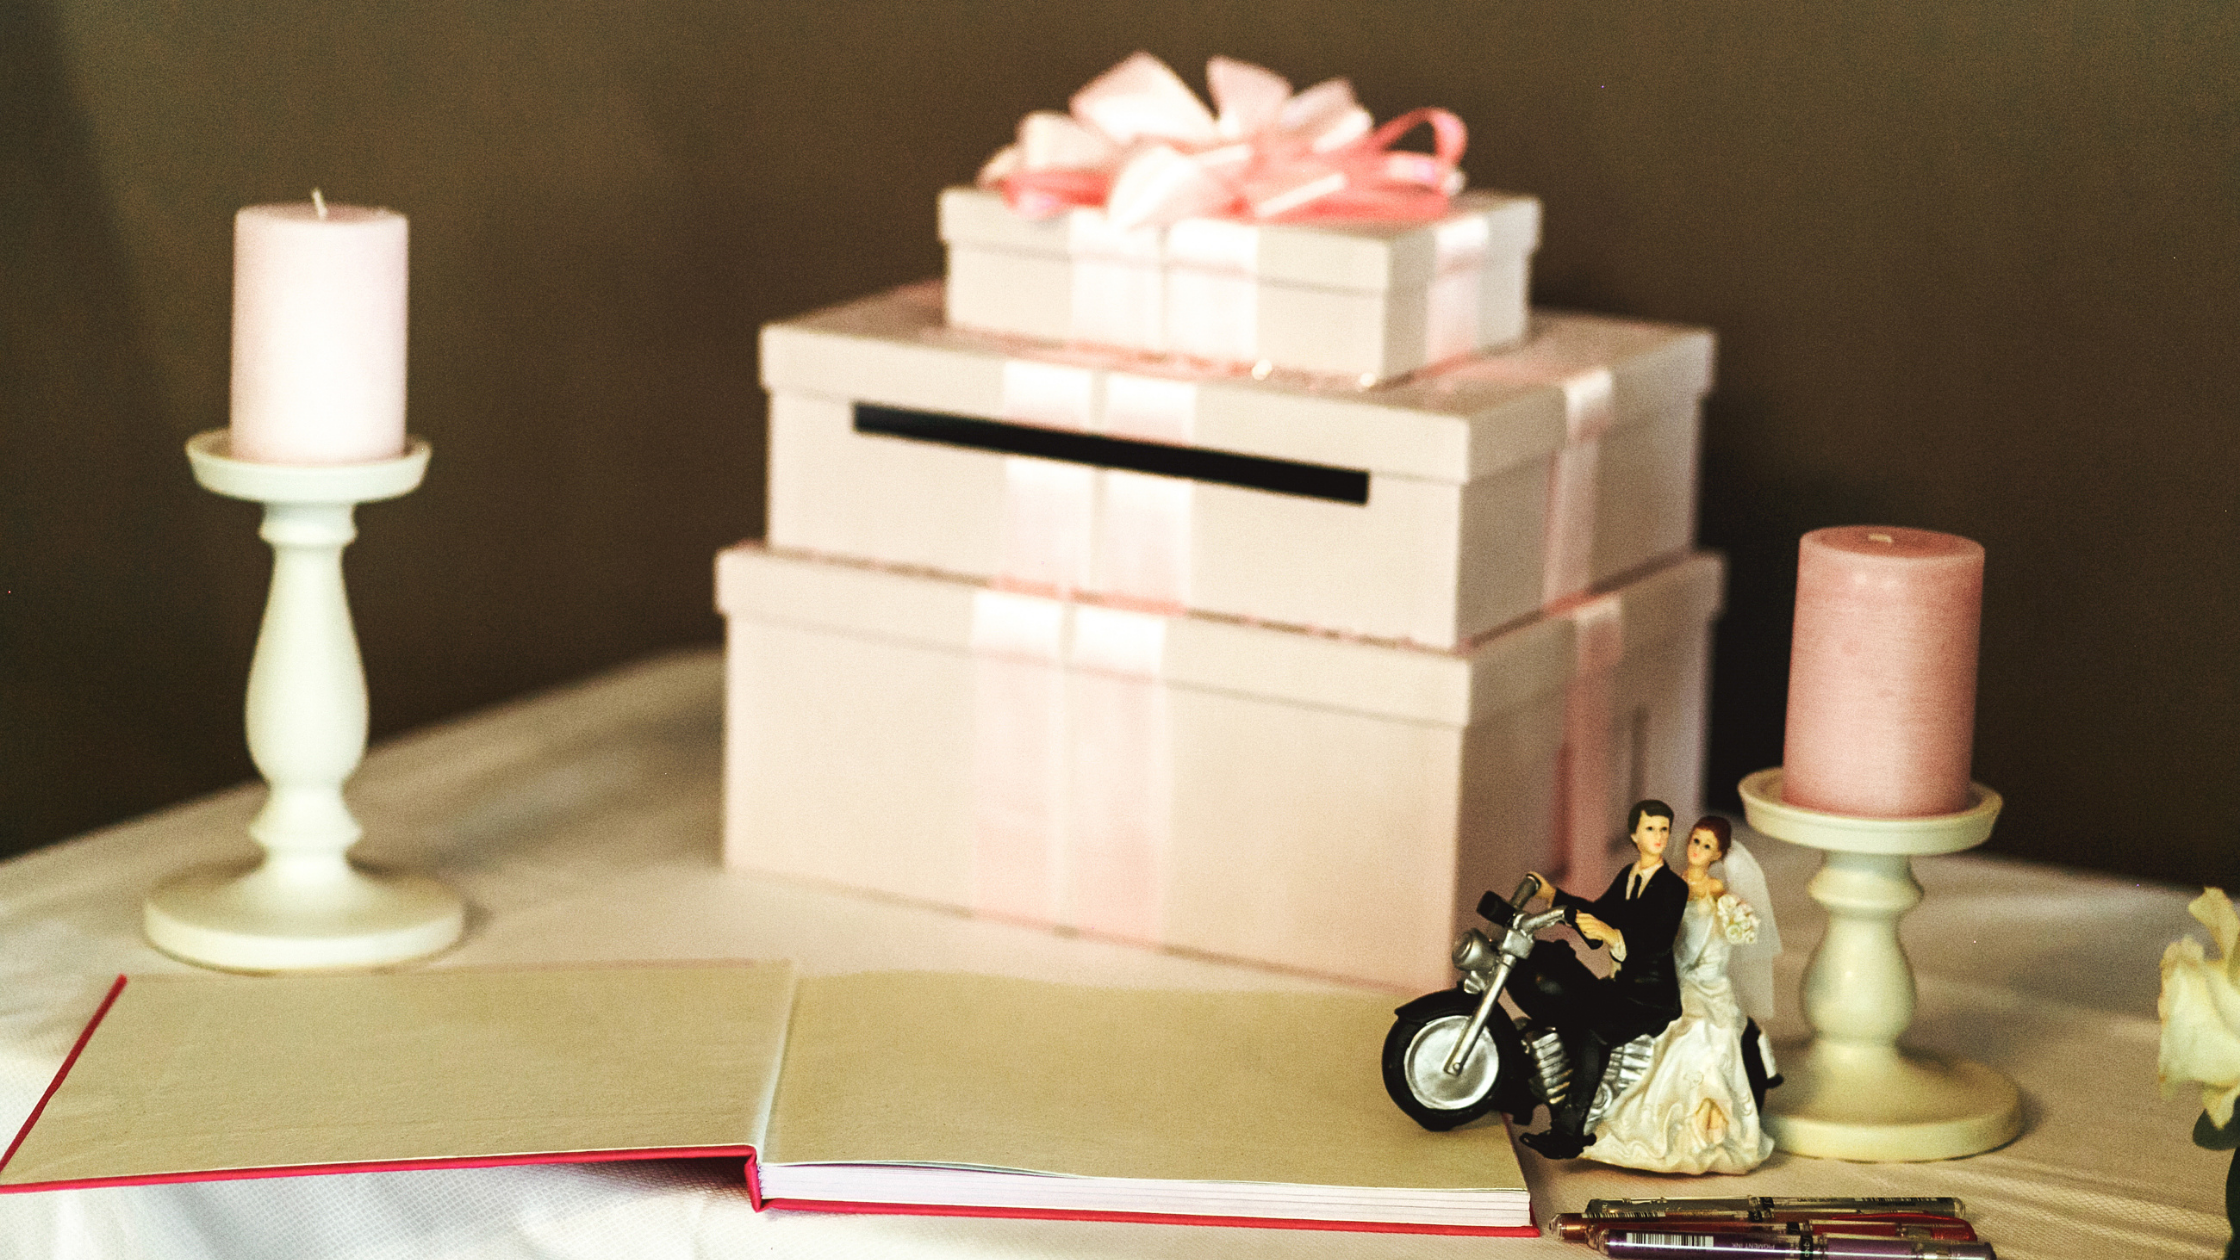 5 Things to Consider When Creating a Wedding Registry